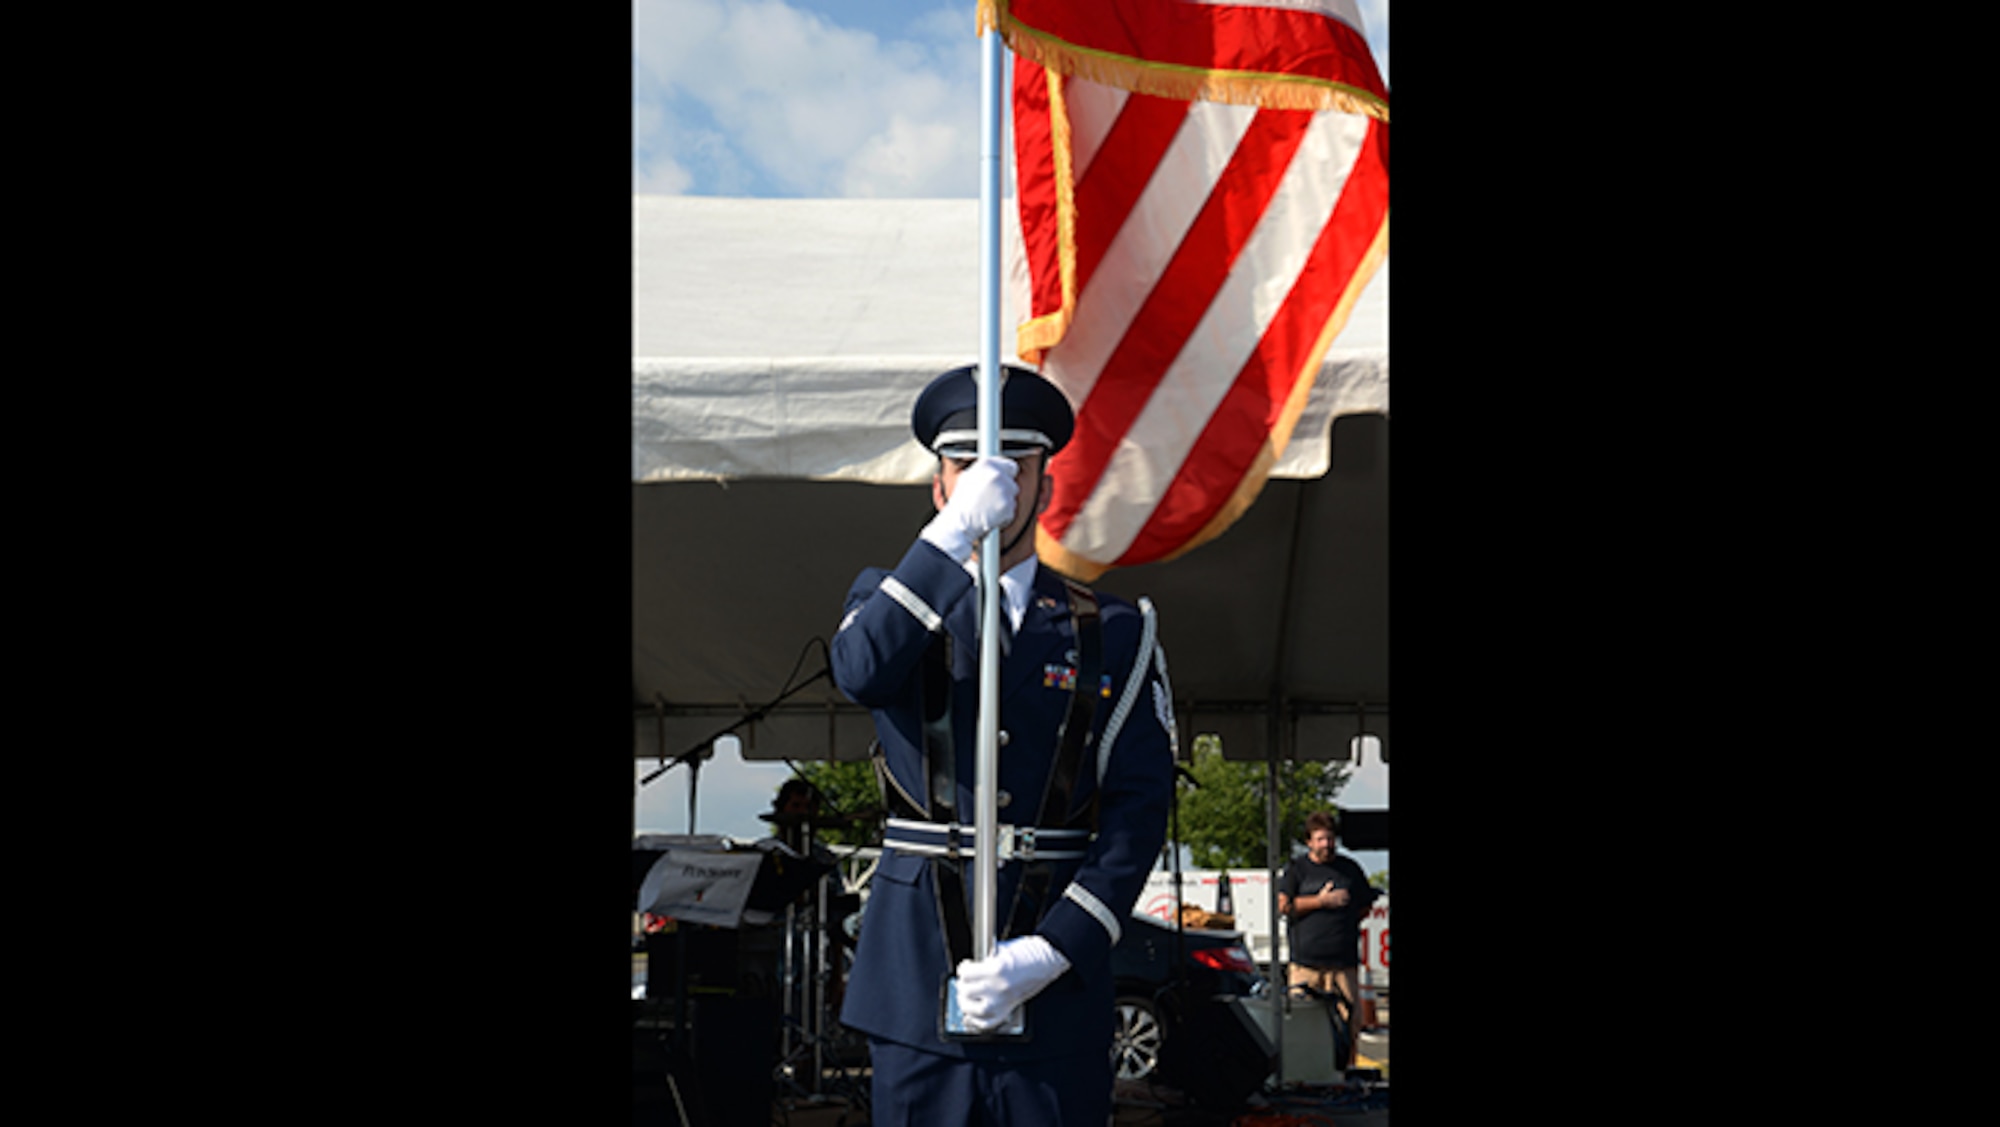 A picture of U.S. Air Force Tech. Sgt. Jonathan D. Kane, a 177th Fighter Wing Honor Guard Member, displaying the colors.